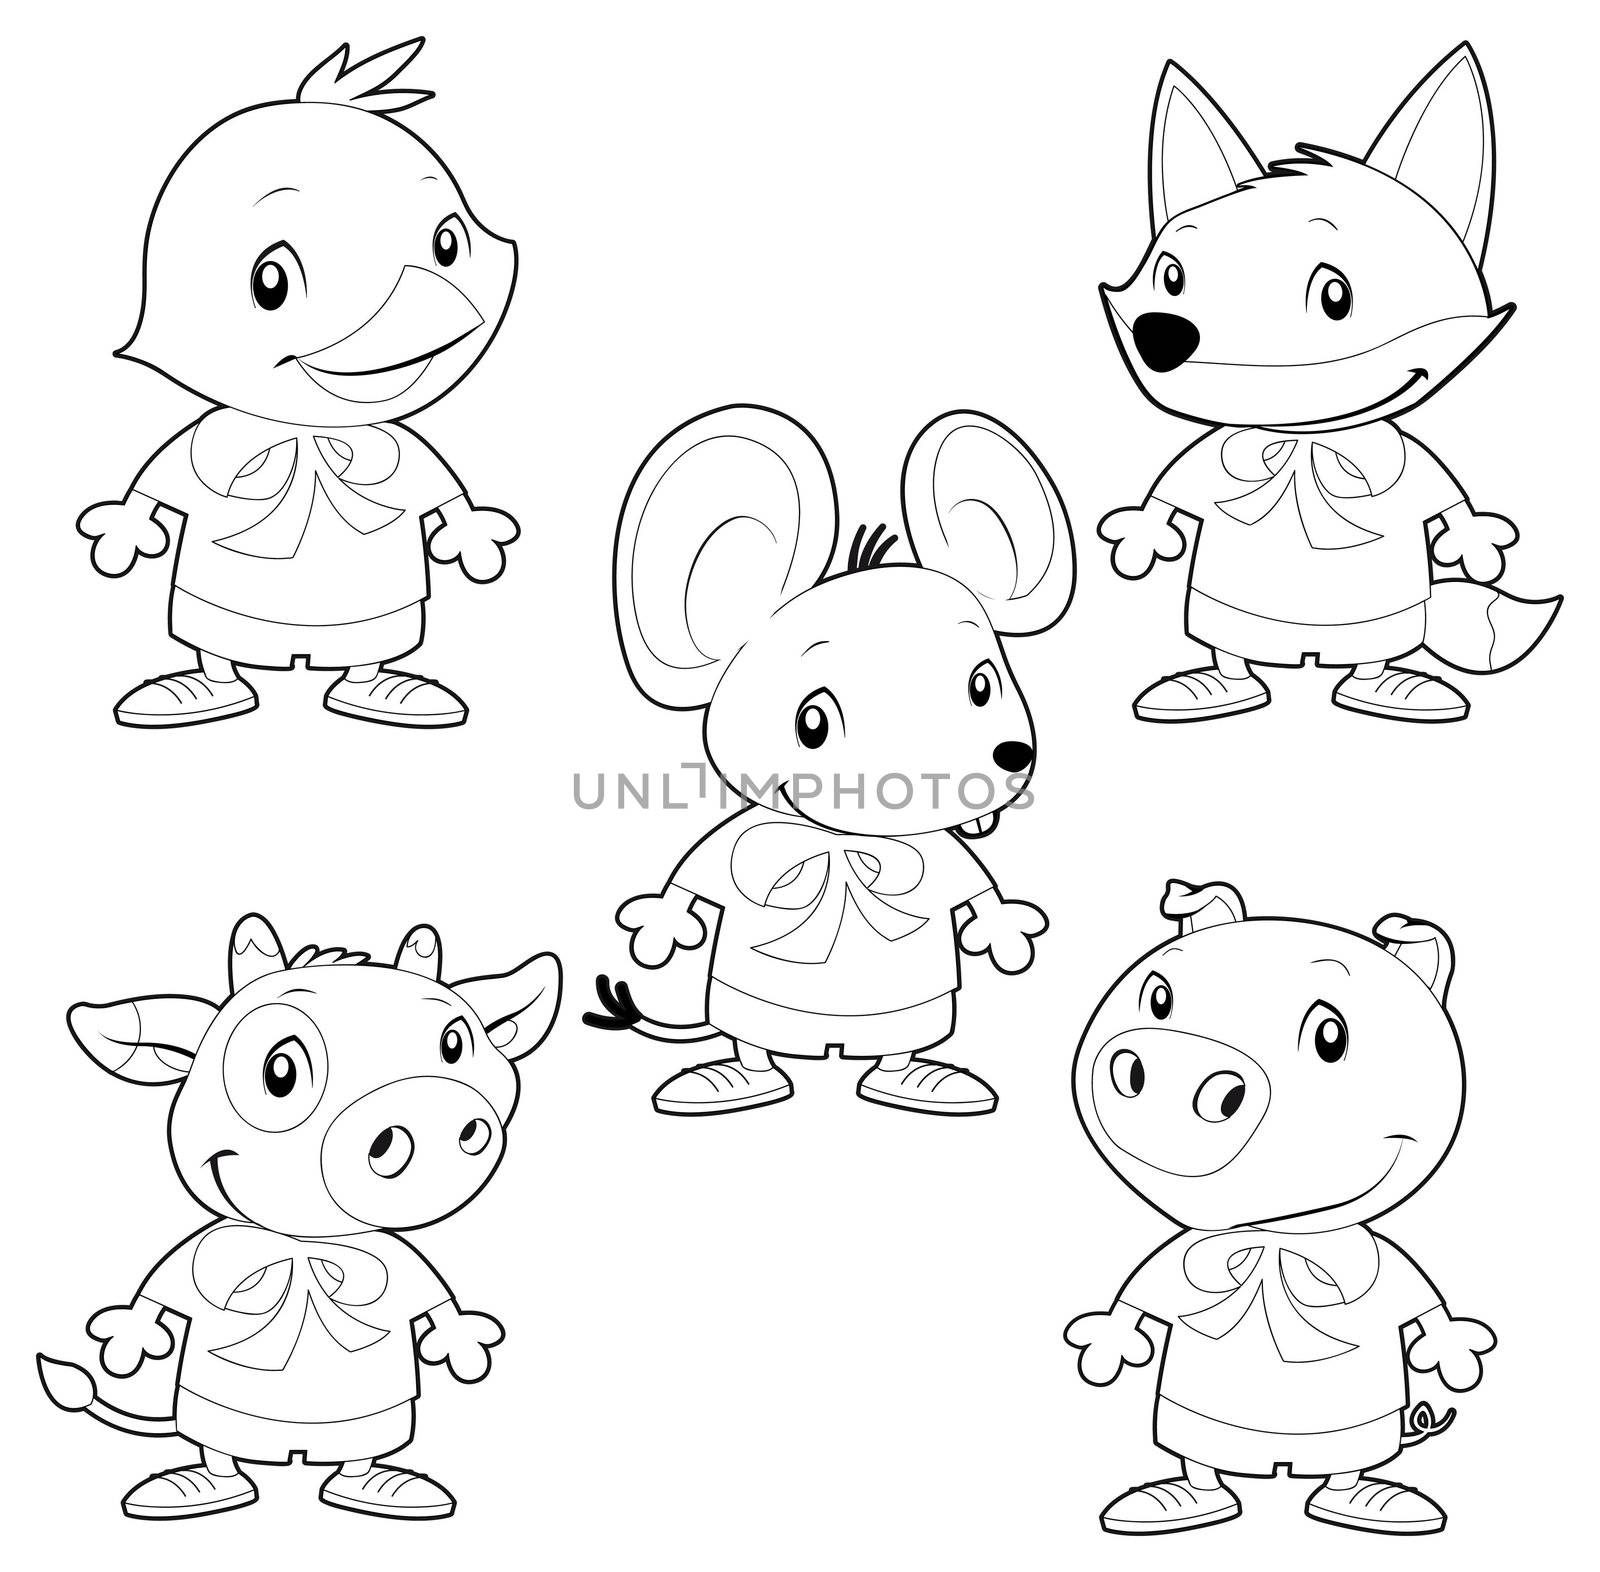 Cute animal family. Vector isolated black and white characters.

